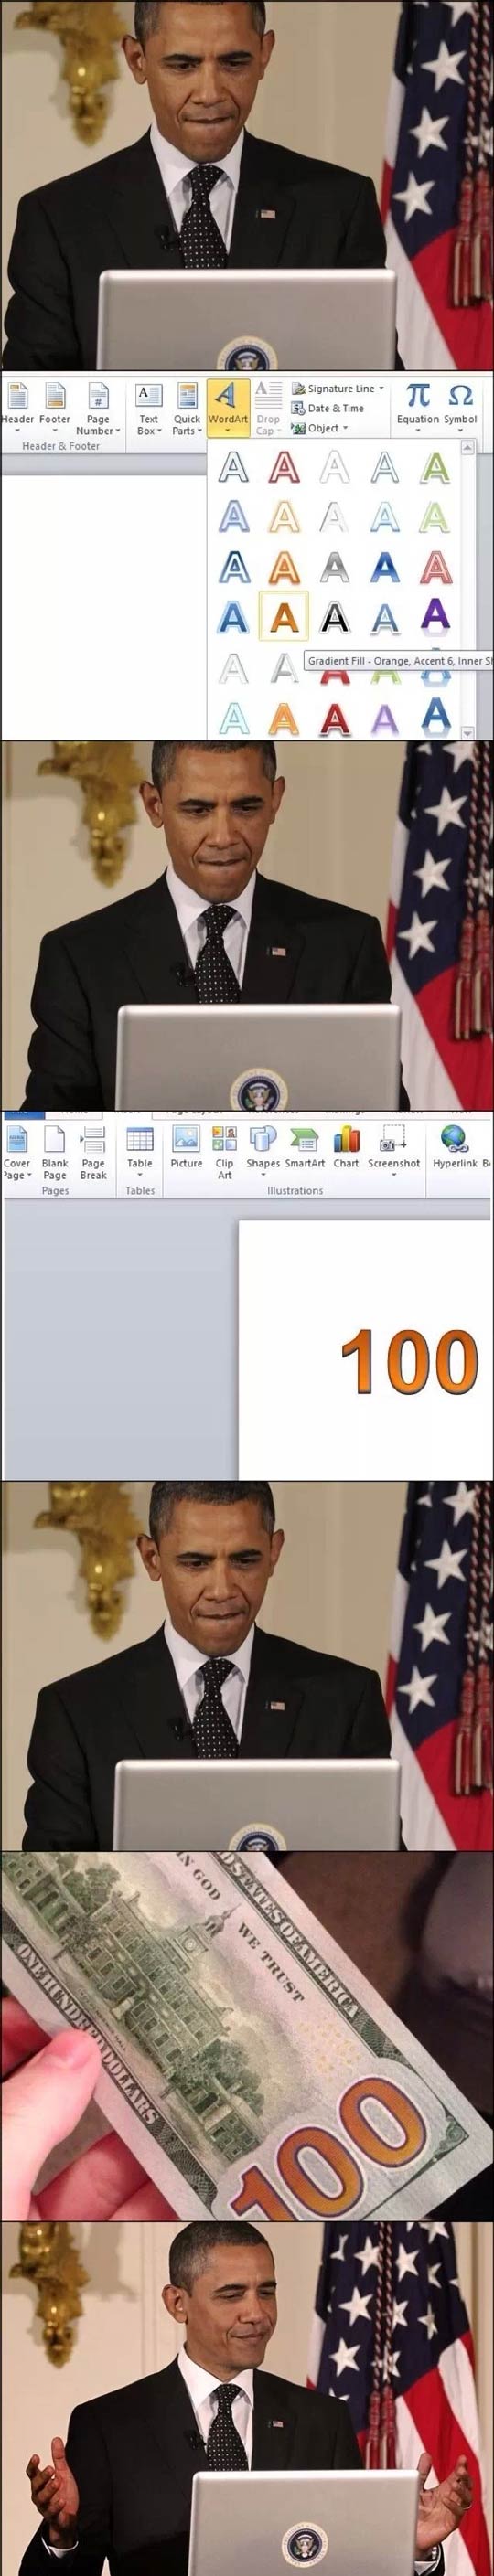 obama new 100 dollar bill meme - A A Signature Line' st Date & Time Object T 52 Equation Symbol Header Footer Page Number Header & Footer Text Box Quick WordArt Drop Parts Cap . Gradient Fill Orange, Accent 6, Inner Si the blog de er Table Table Page Brea